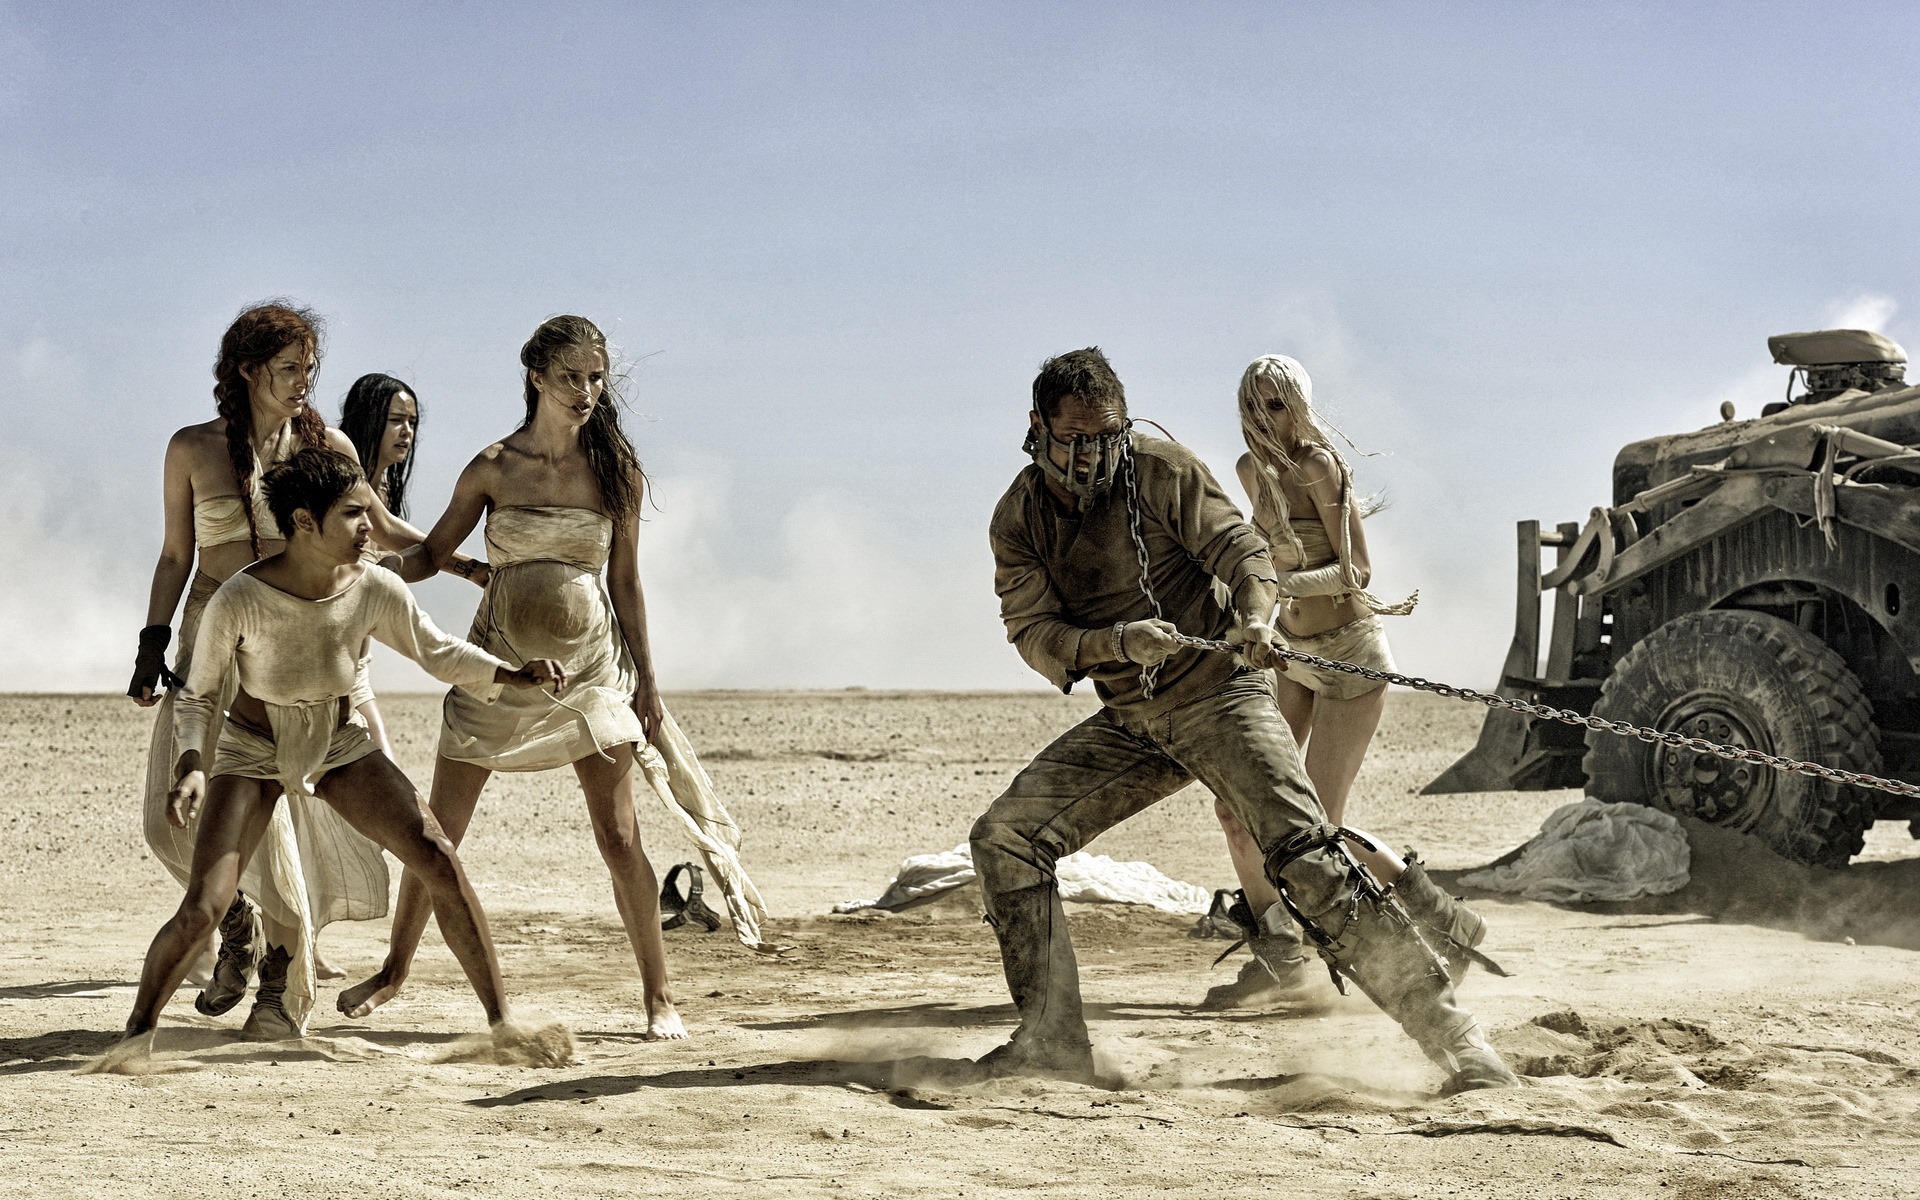 Mad Max: Fury Road, HD movie wallpapers #36 - 1920x1200